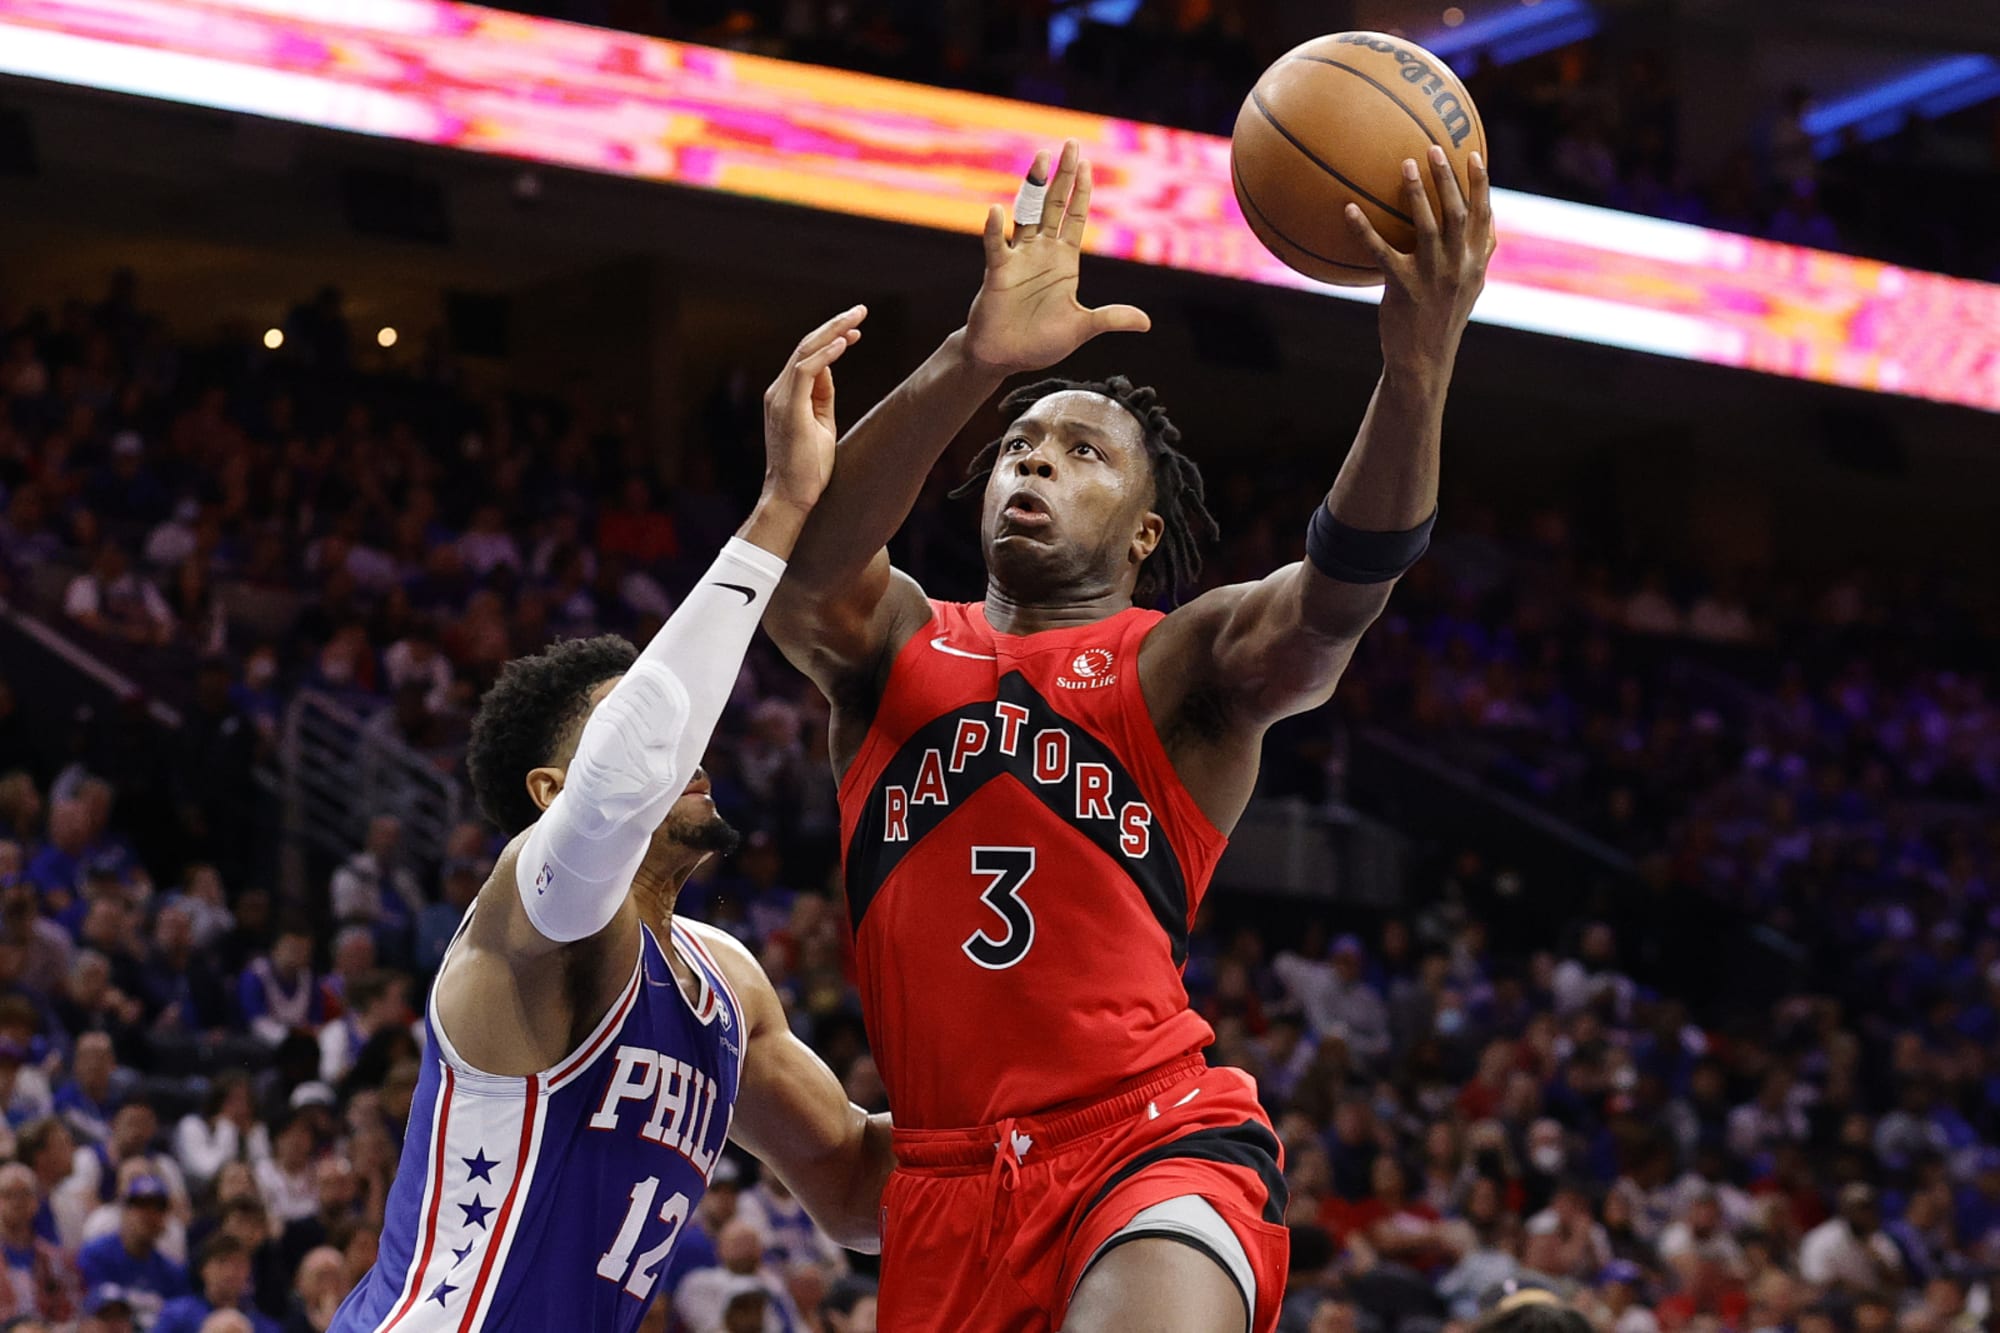 Raptors fans can rejoice as Blazers whiff on OG Anunoby trade